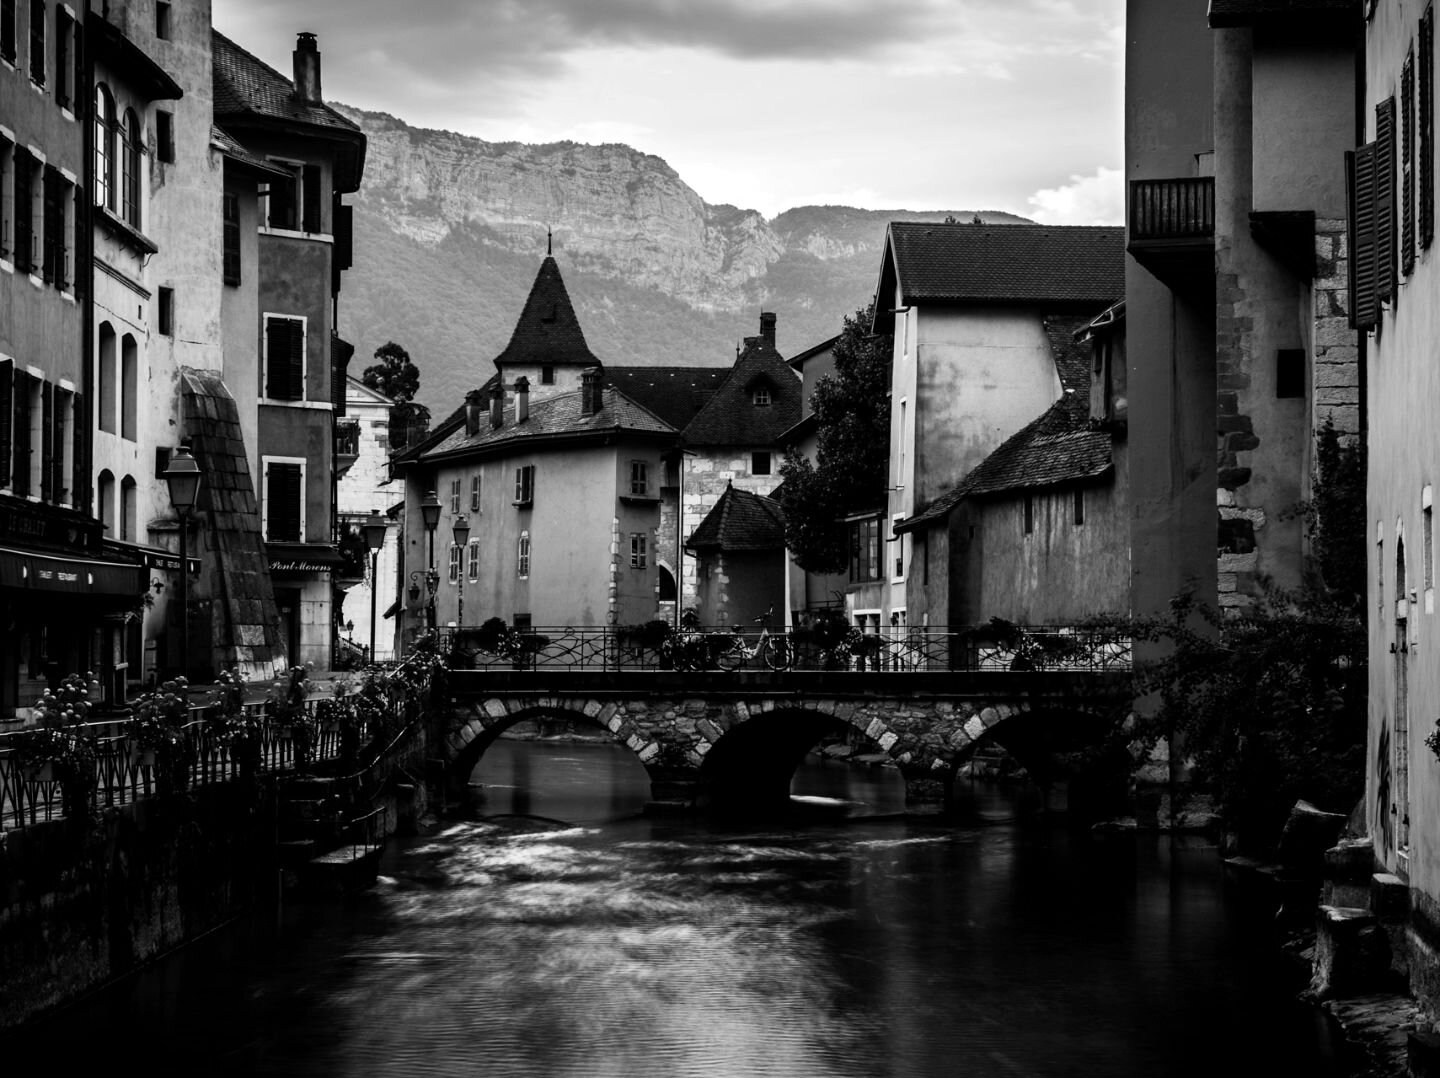 Back in Annecy with some gritty pictures of the town still fast asleep.

More of Albania and Italy to follow!